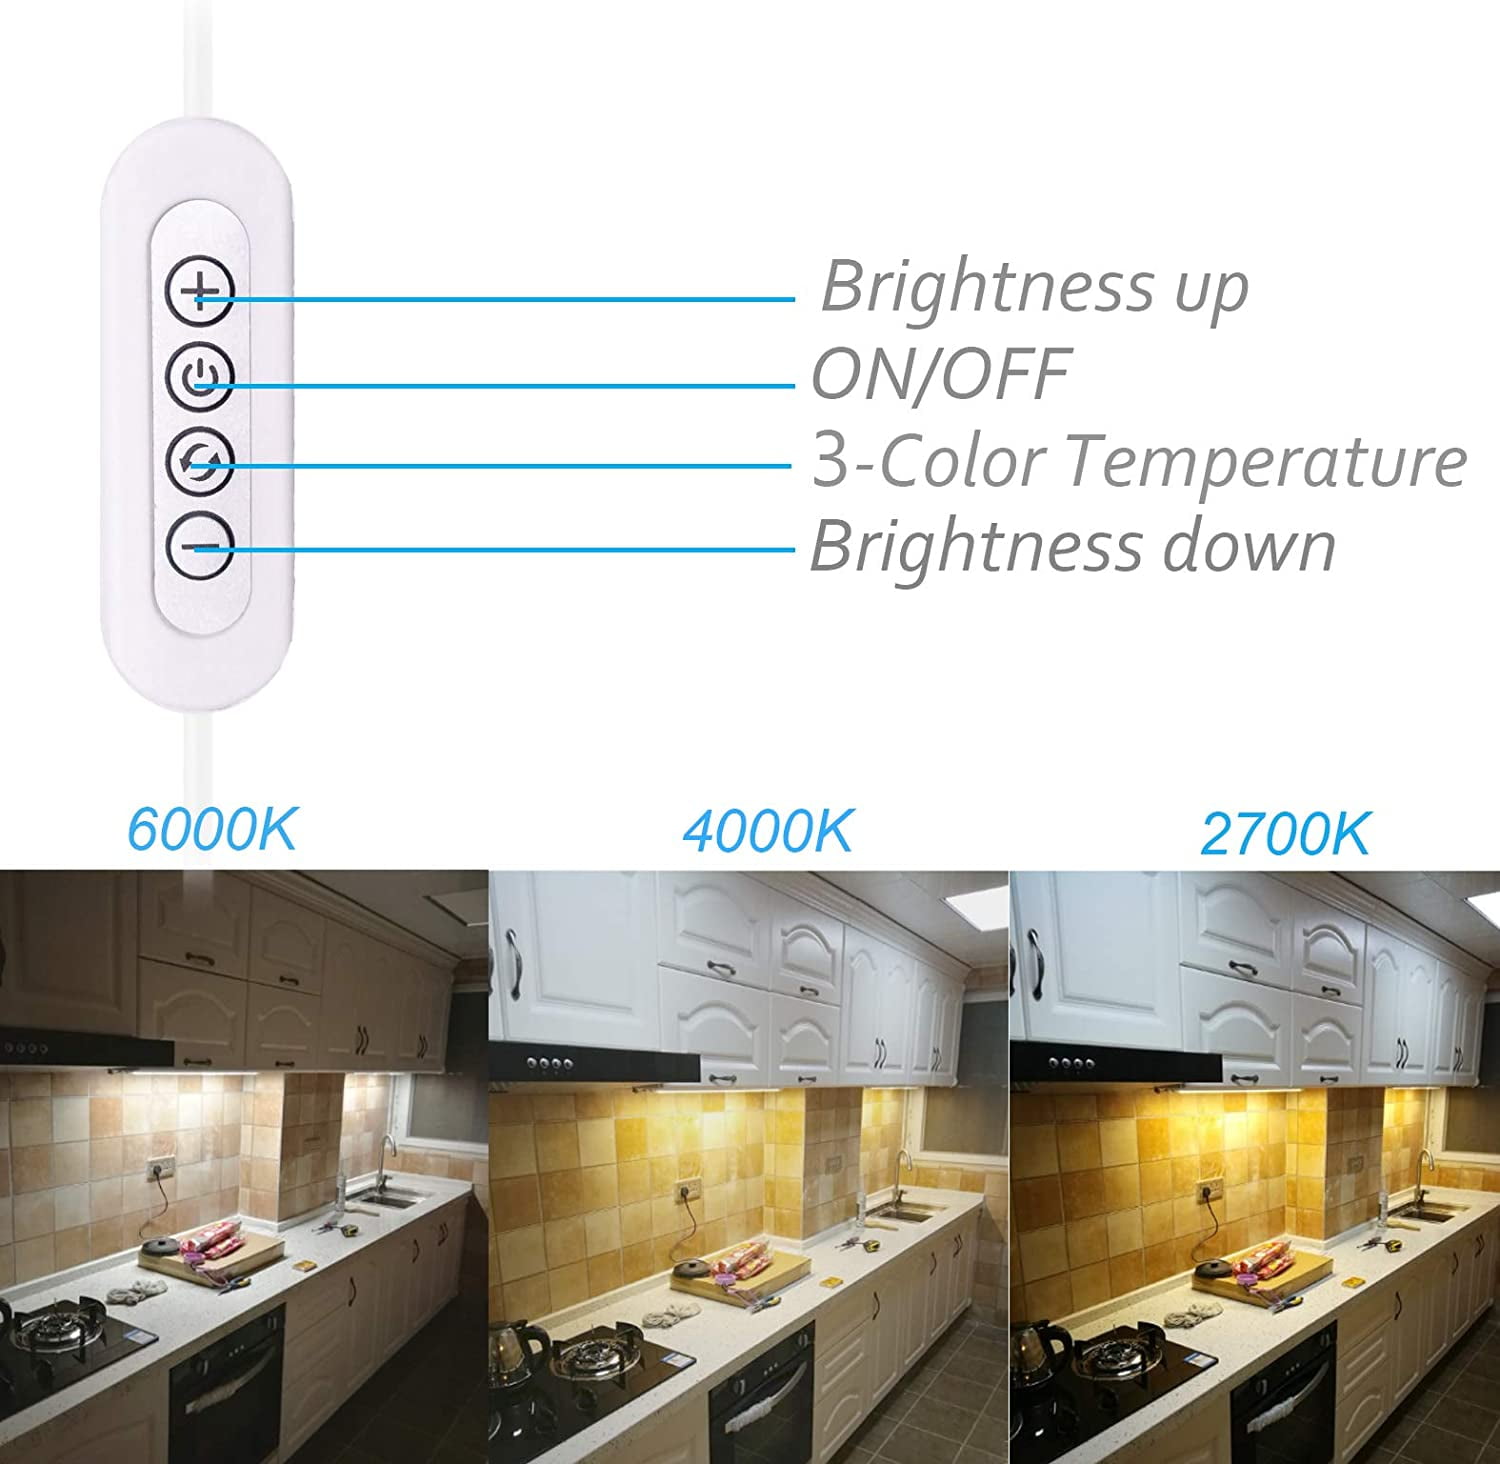 Dimmable 3 Color Temperature, LED Under Cabinet Lighting Bar Built-in Magnets 